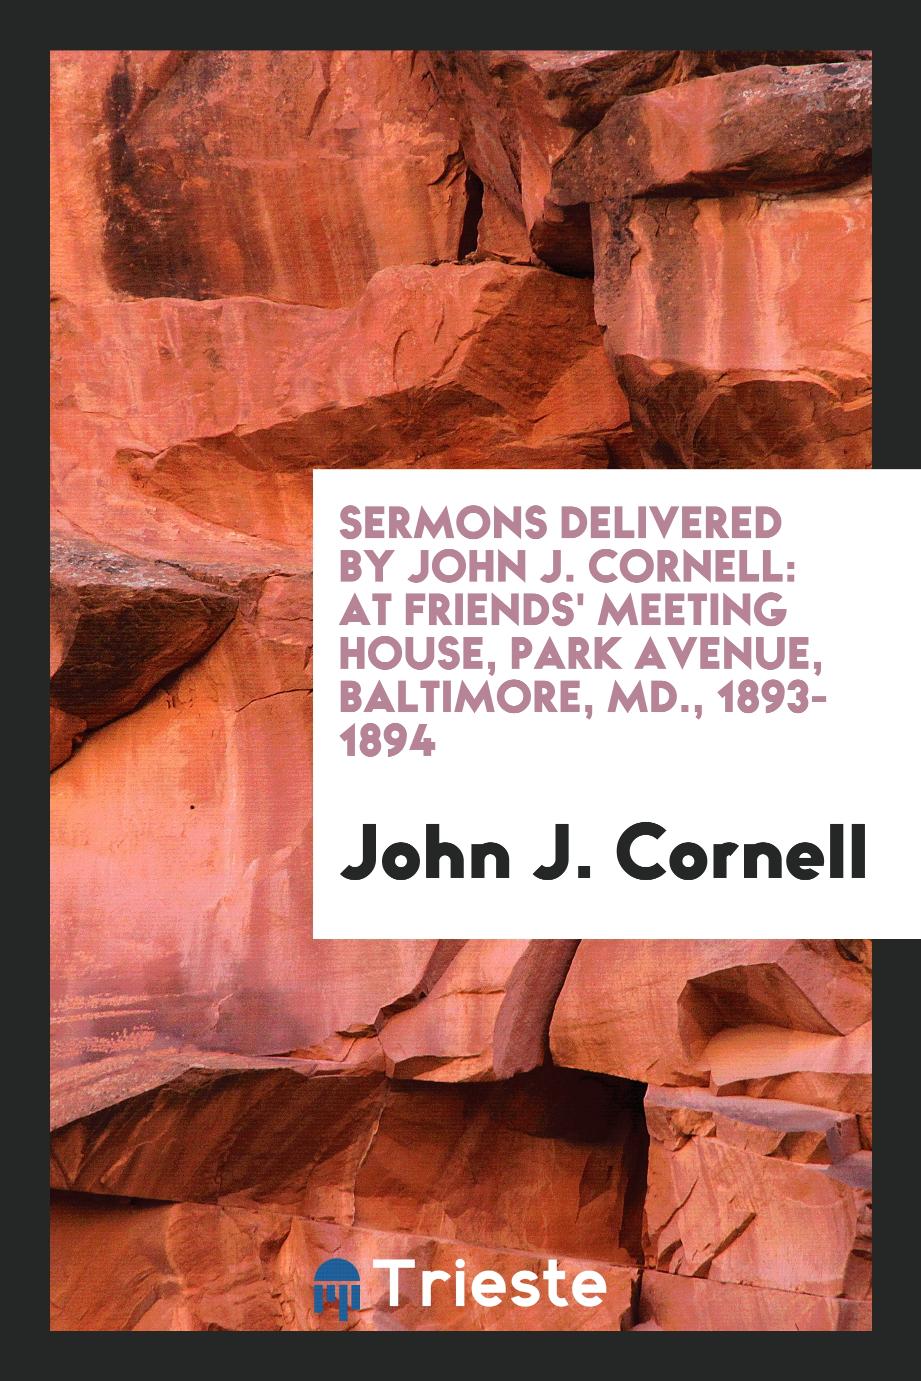 Sermons Delivered by John J. Cornell: At Friends' Meeting House, Park Avenue, Baltimore, Md., 1893-1894